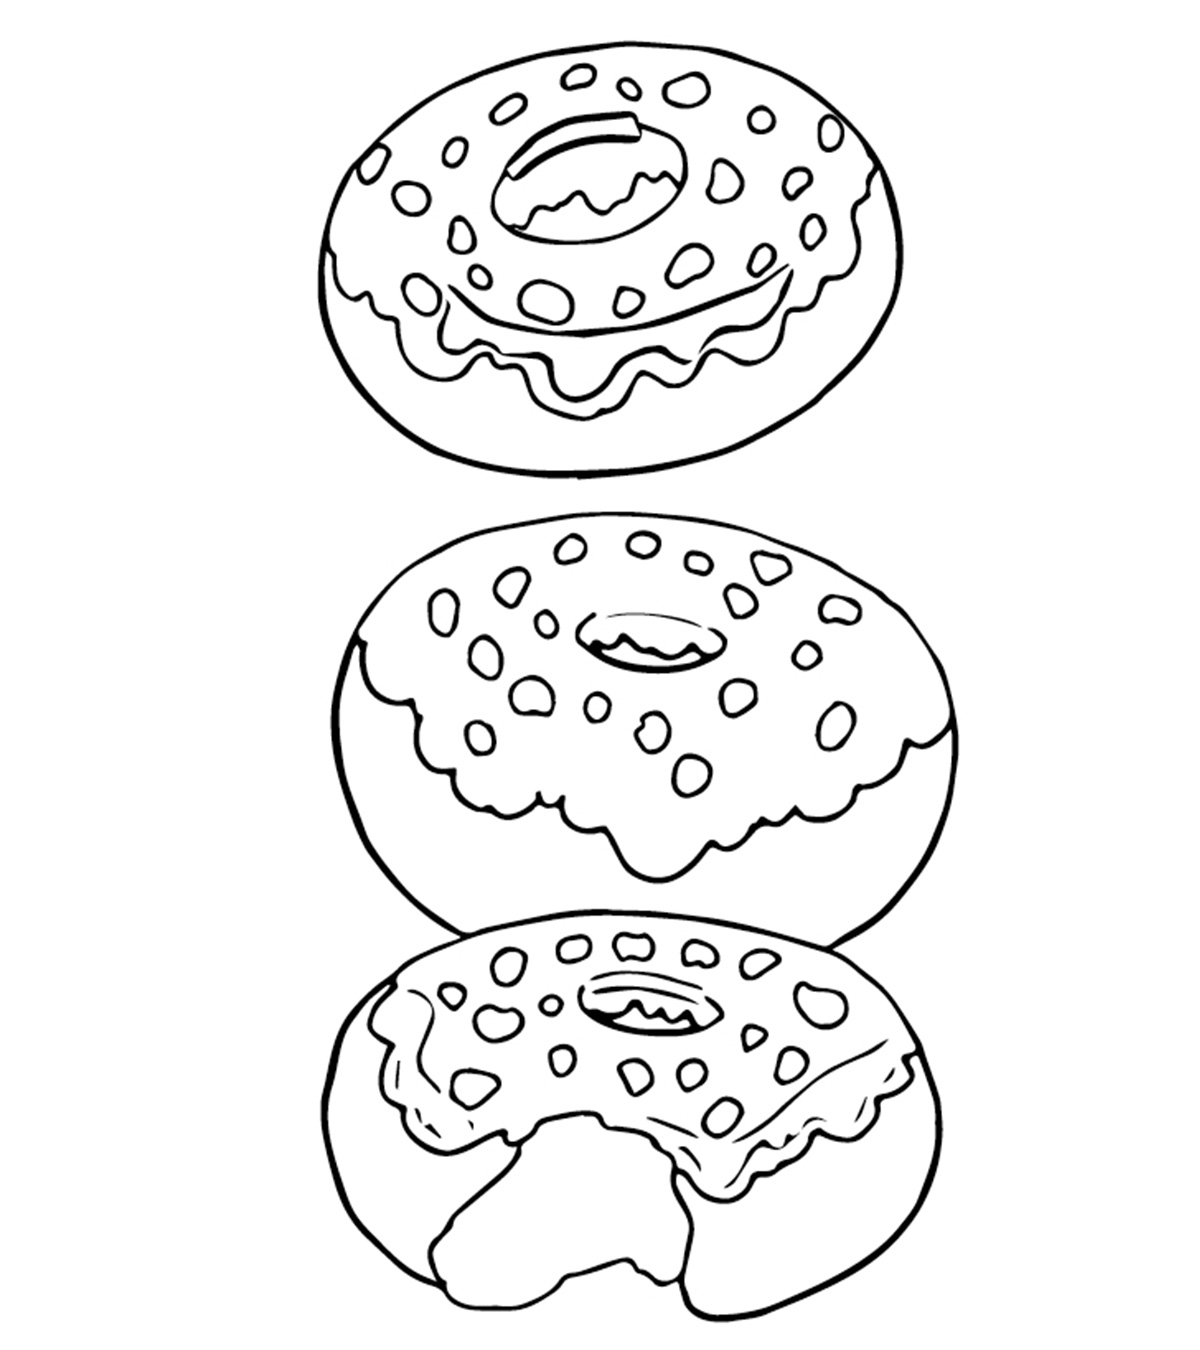 Top 10 Donut Coloring Pages For Your Toddler